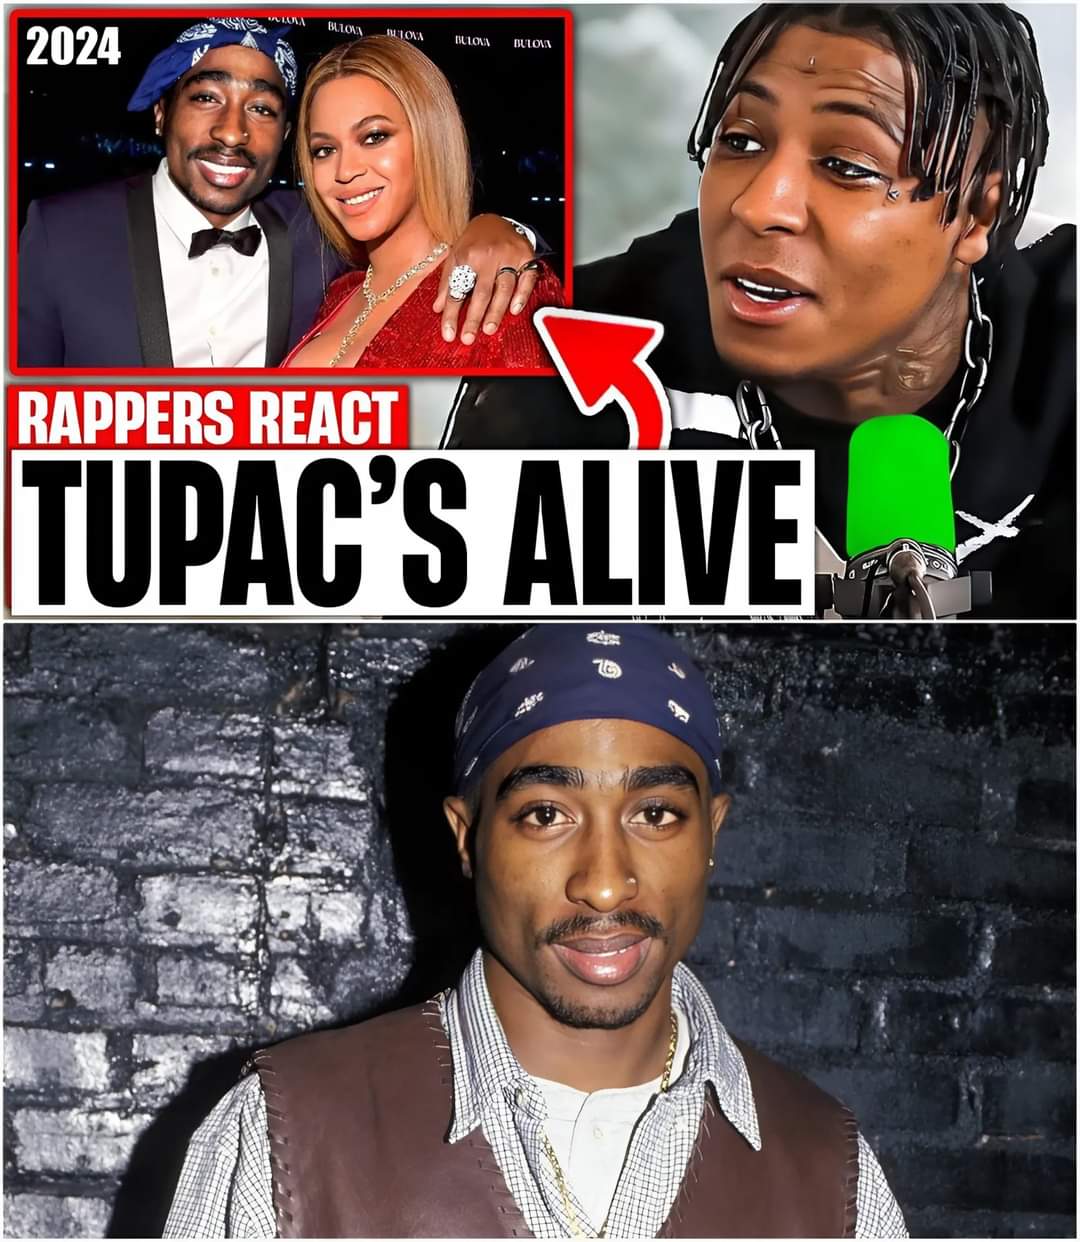 What happend? Tupac was alive this whole time – Rappers React To Tupac Shakur RETURNING IN 2024